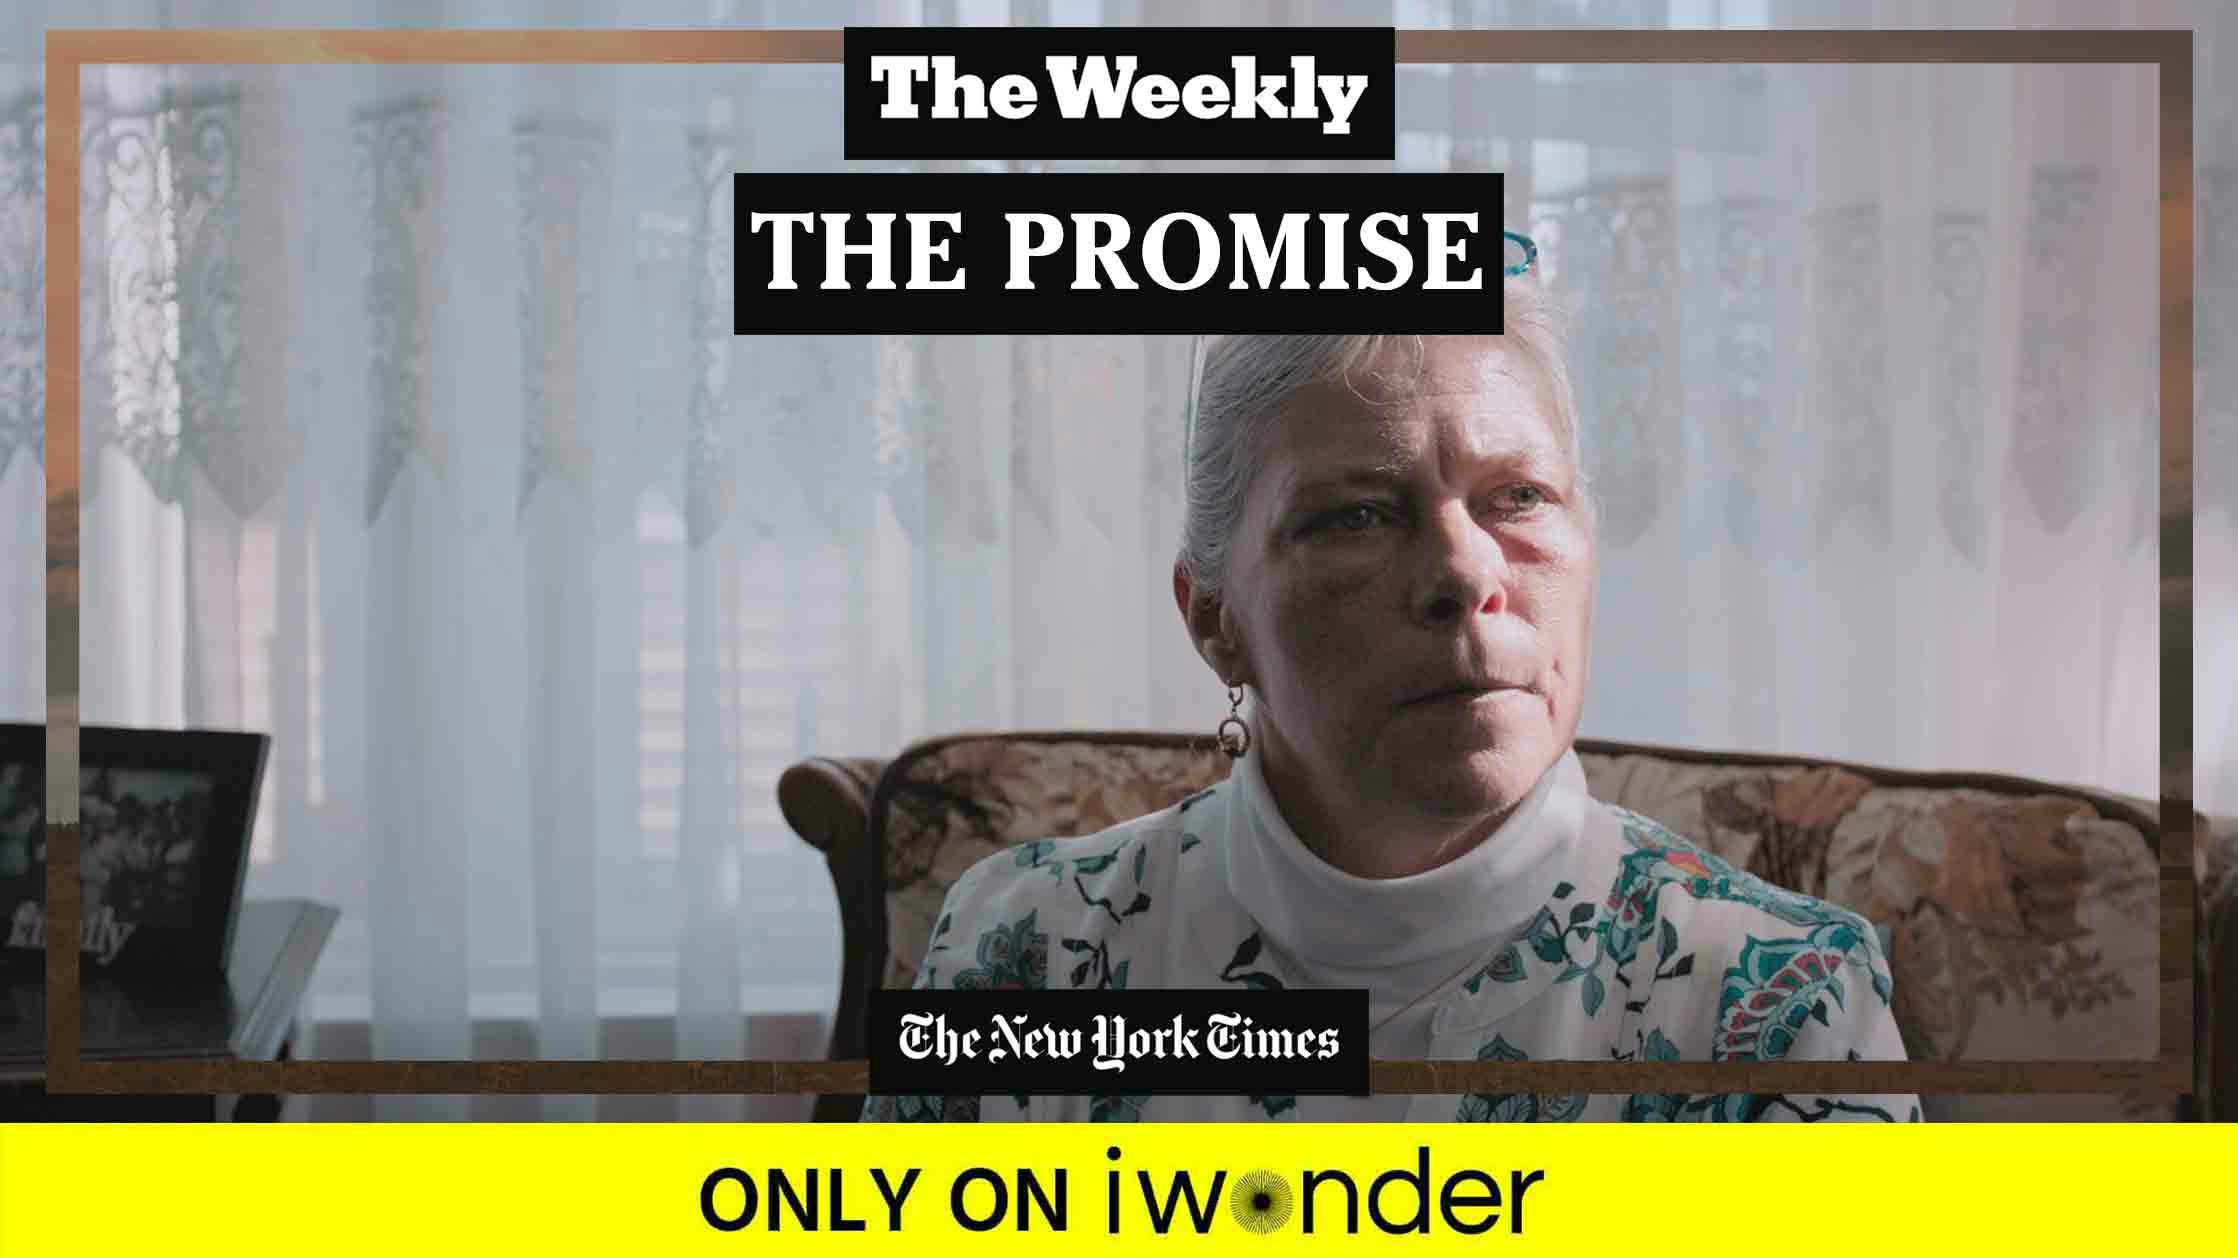 The Weekly: The Promise